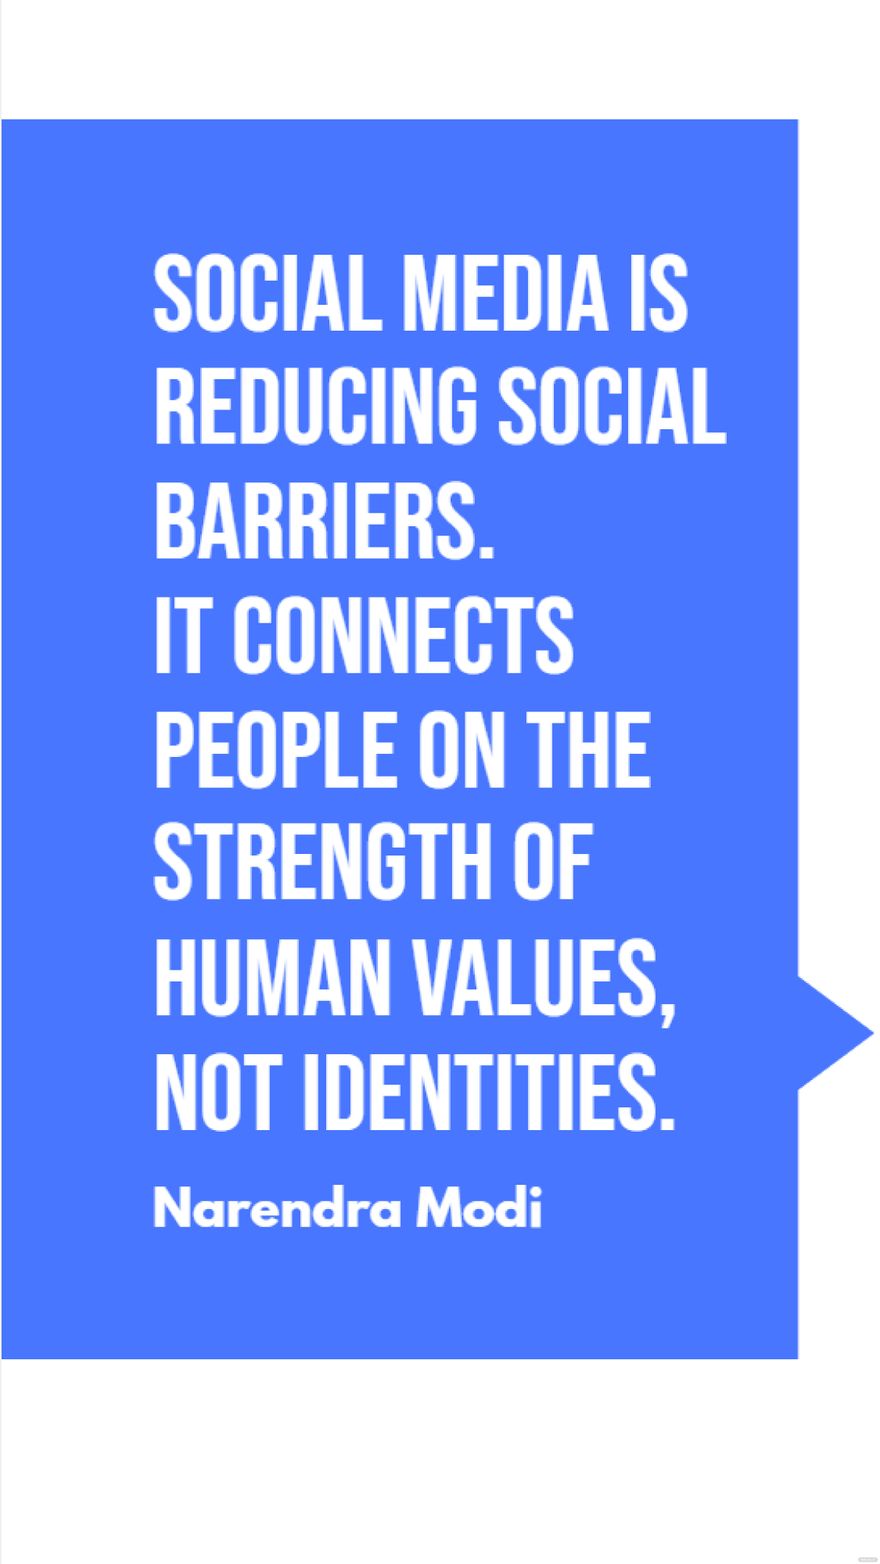 Narendra Modi - Social media is reducing social barriers. It connects people on the strength of human values, not identities.